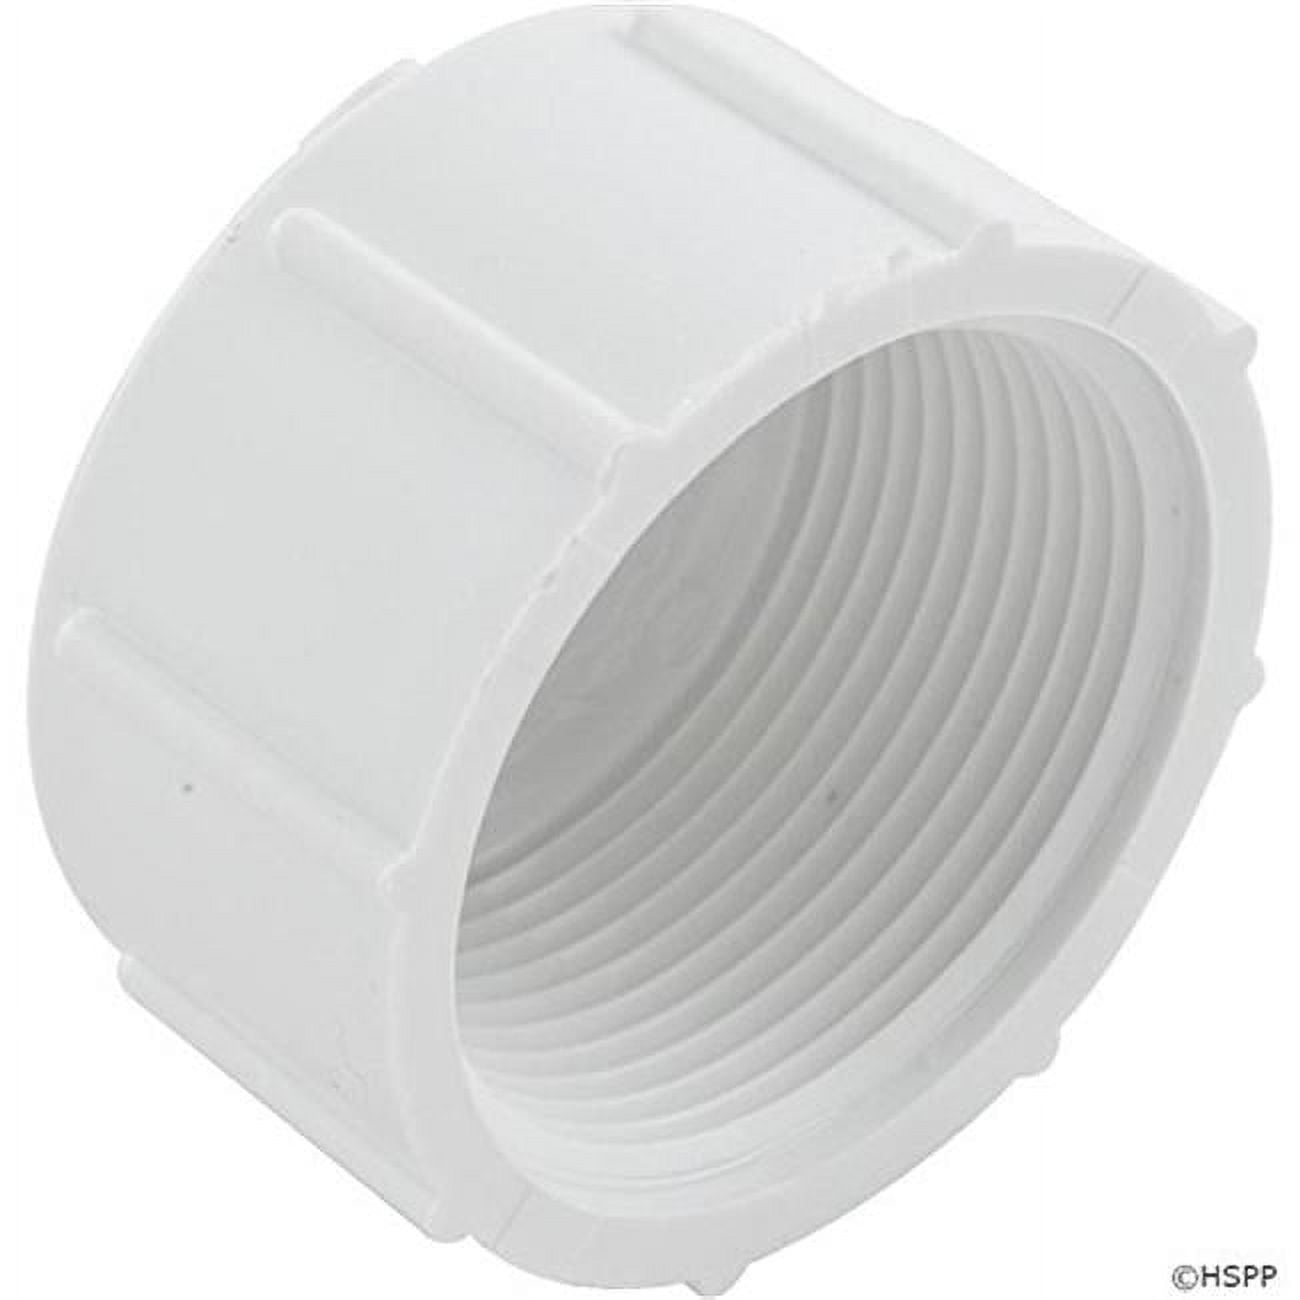 448015 1.5 In. Pvc Fpt Cap Pipe & Fittings For Sch40